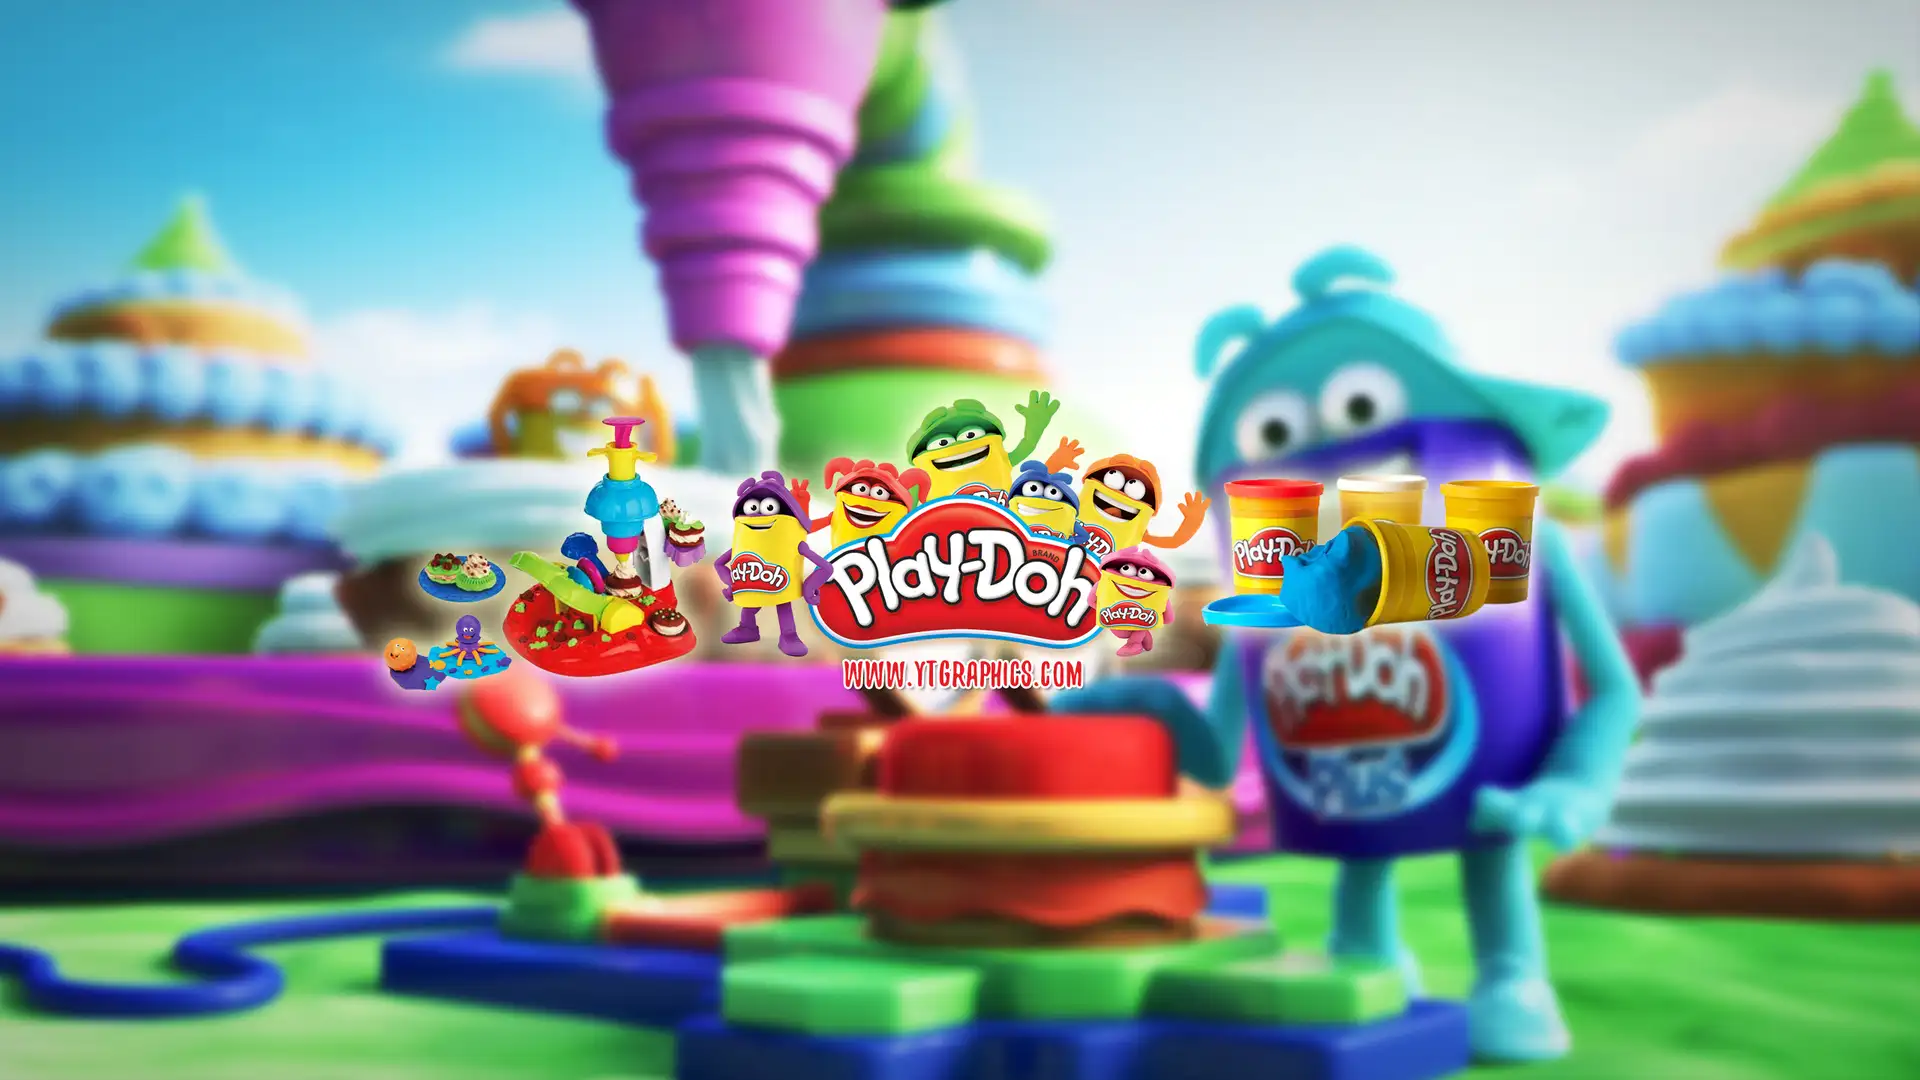 Play-Doh Banner